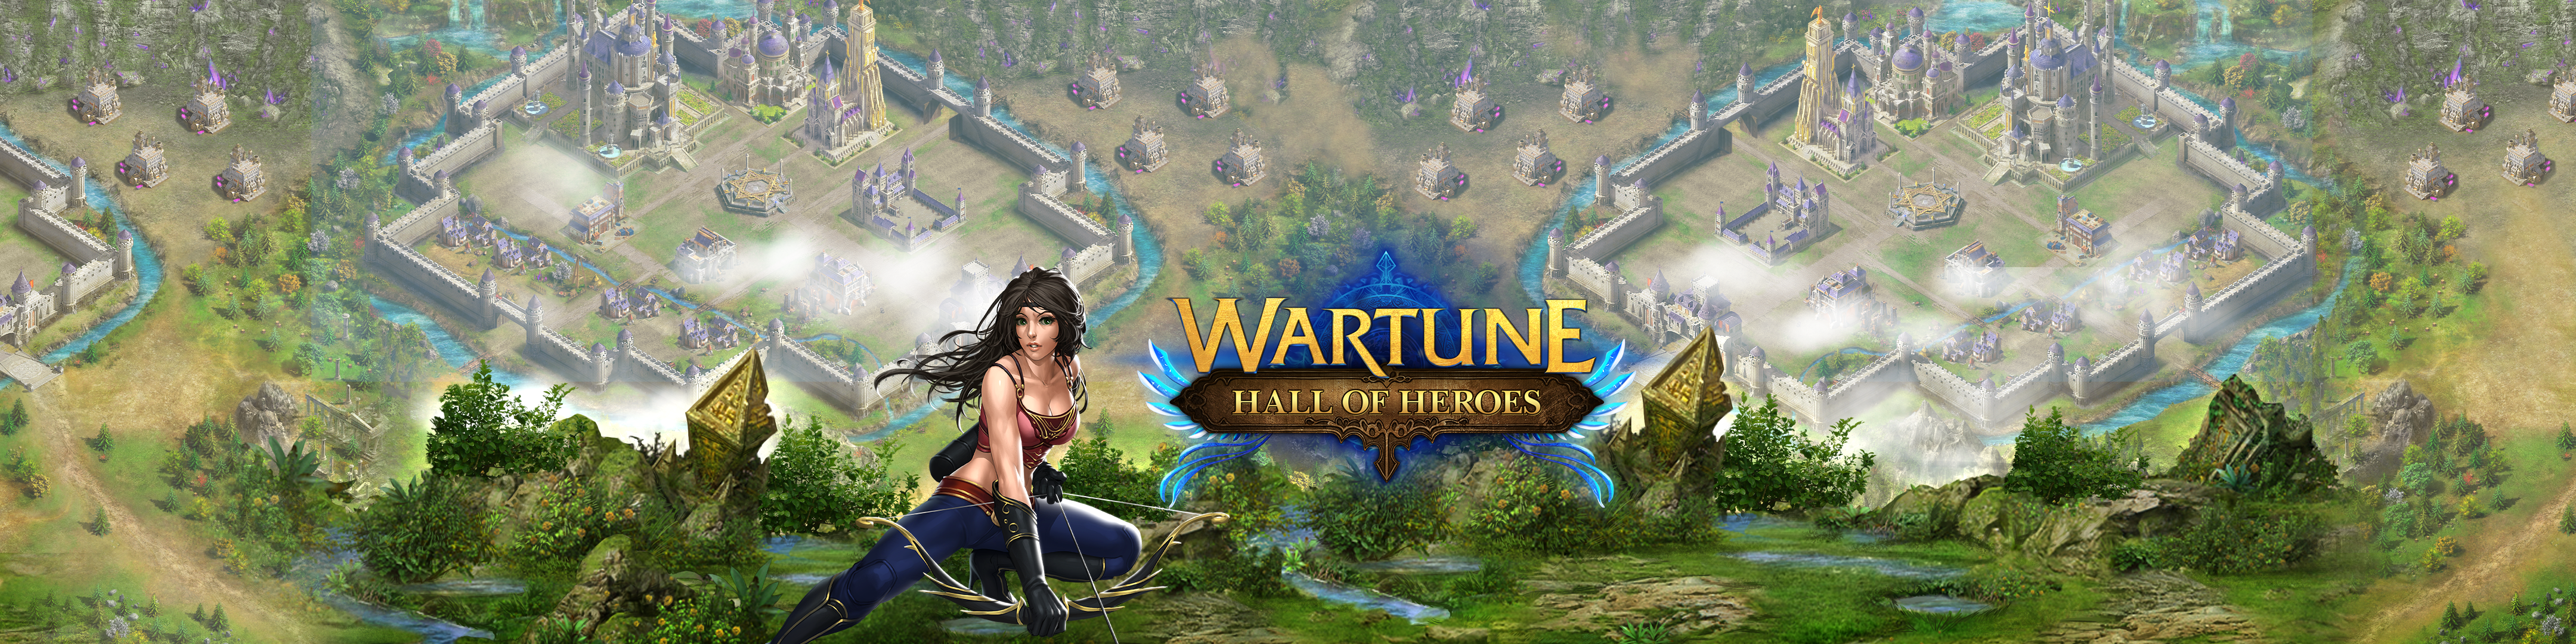 Wartune Hall Of Heroes Overview Apple App Store Us